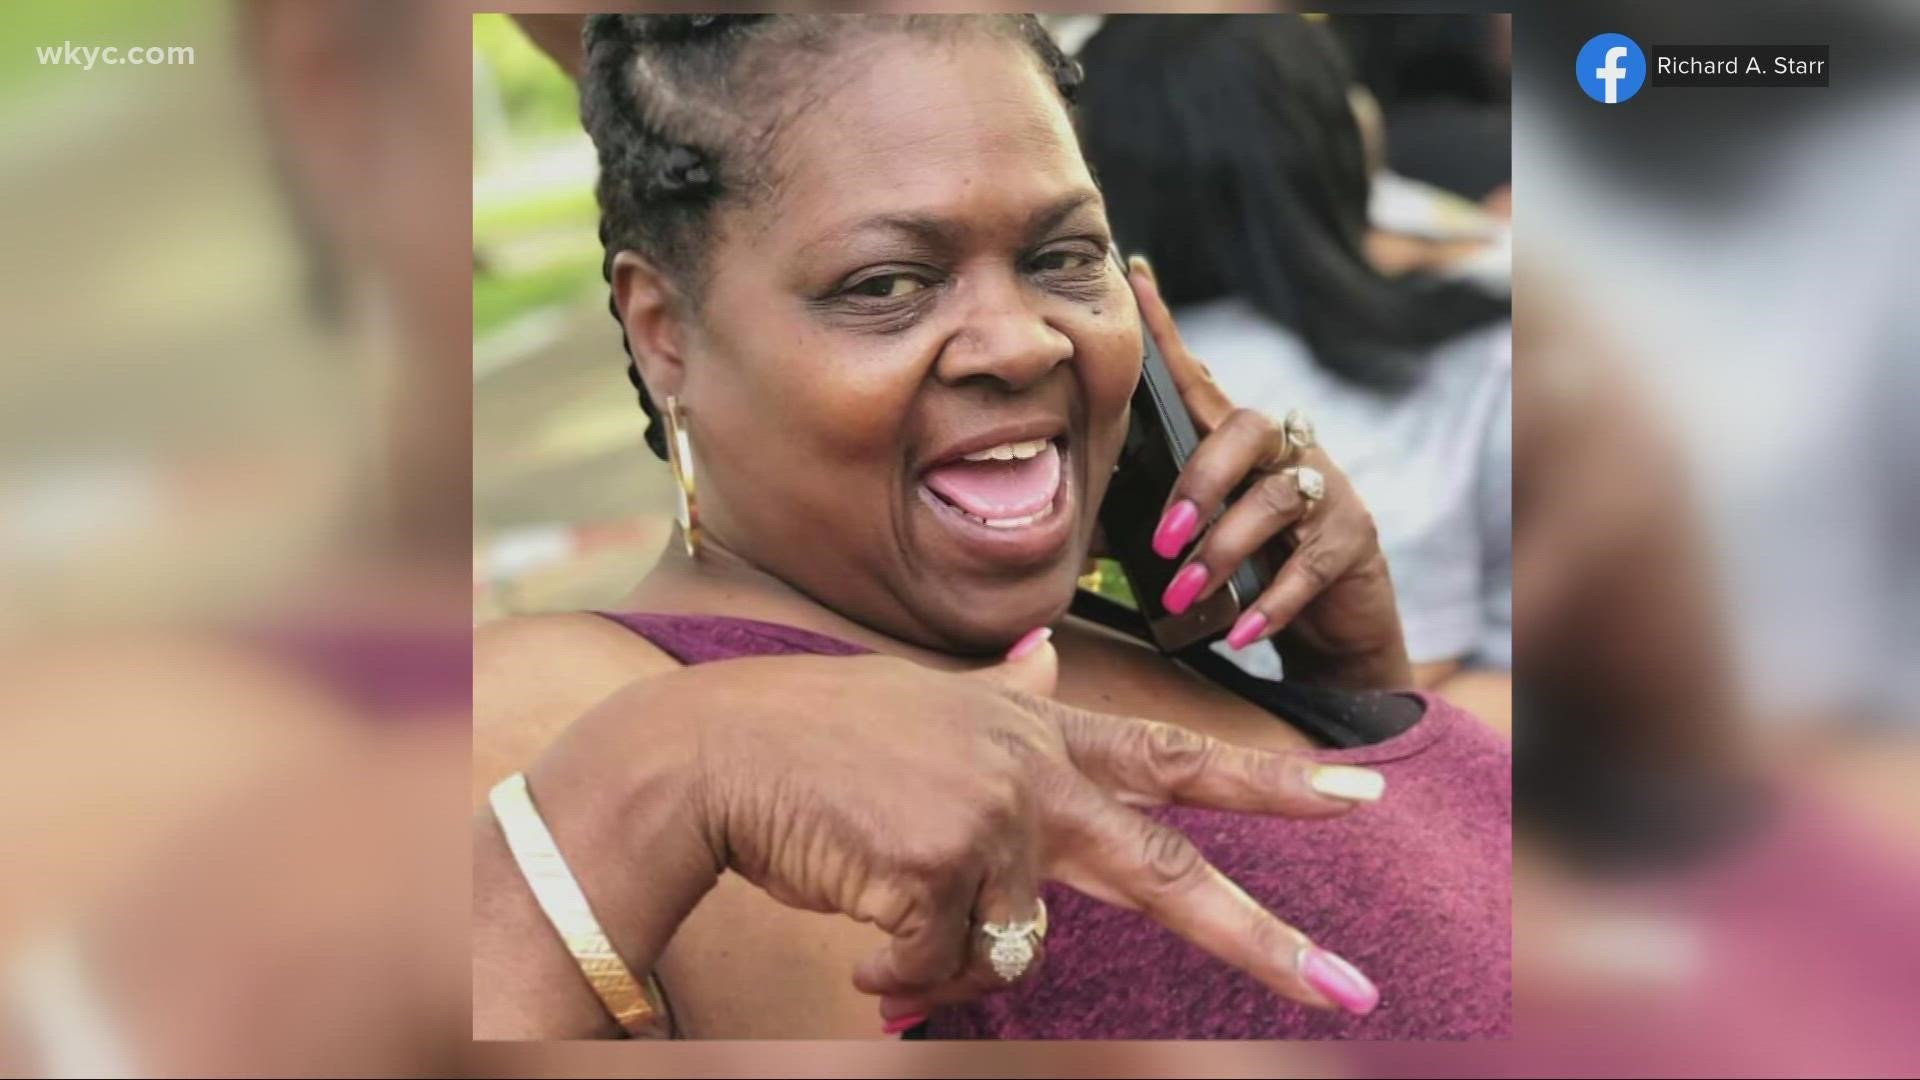 Janece Jackson, the daughter of Cleveland Mayor Frank G. Jackson and mother of recently murdered Frank Q. Jackson, has died.